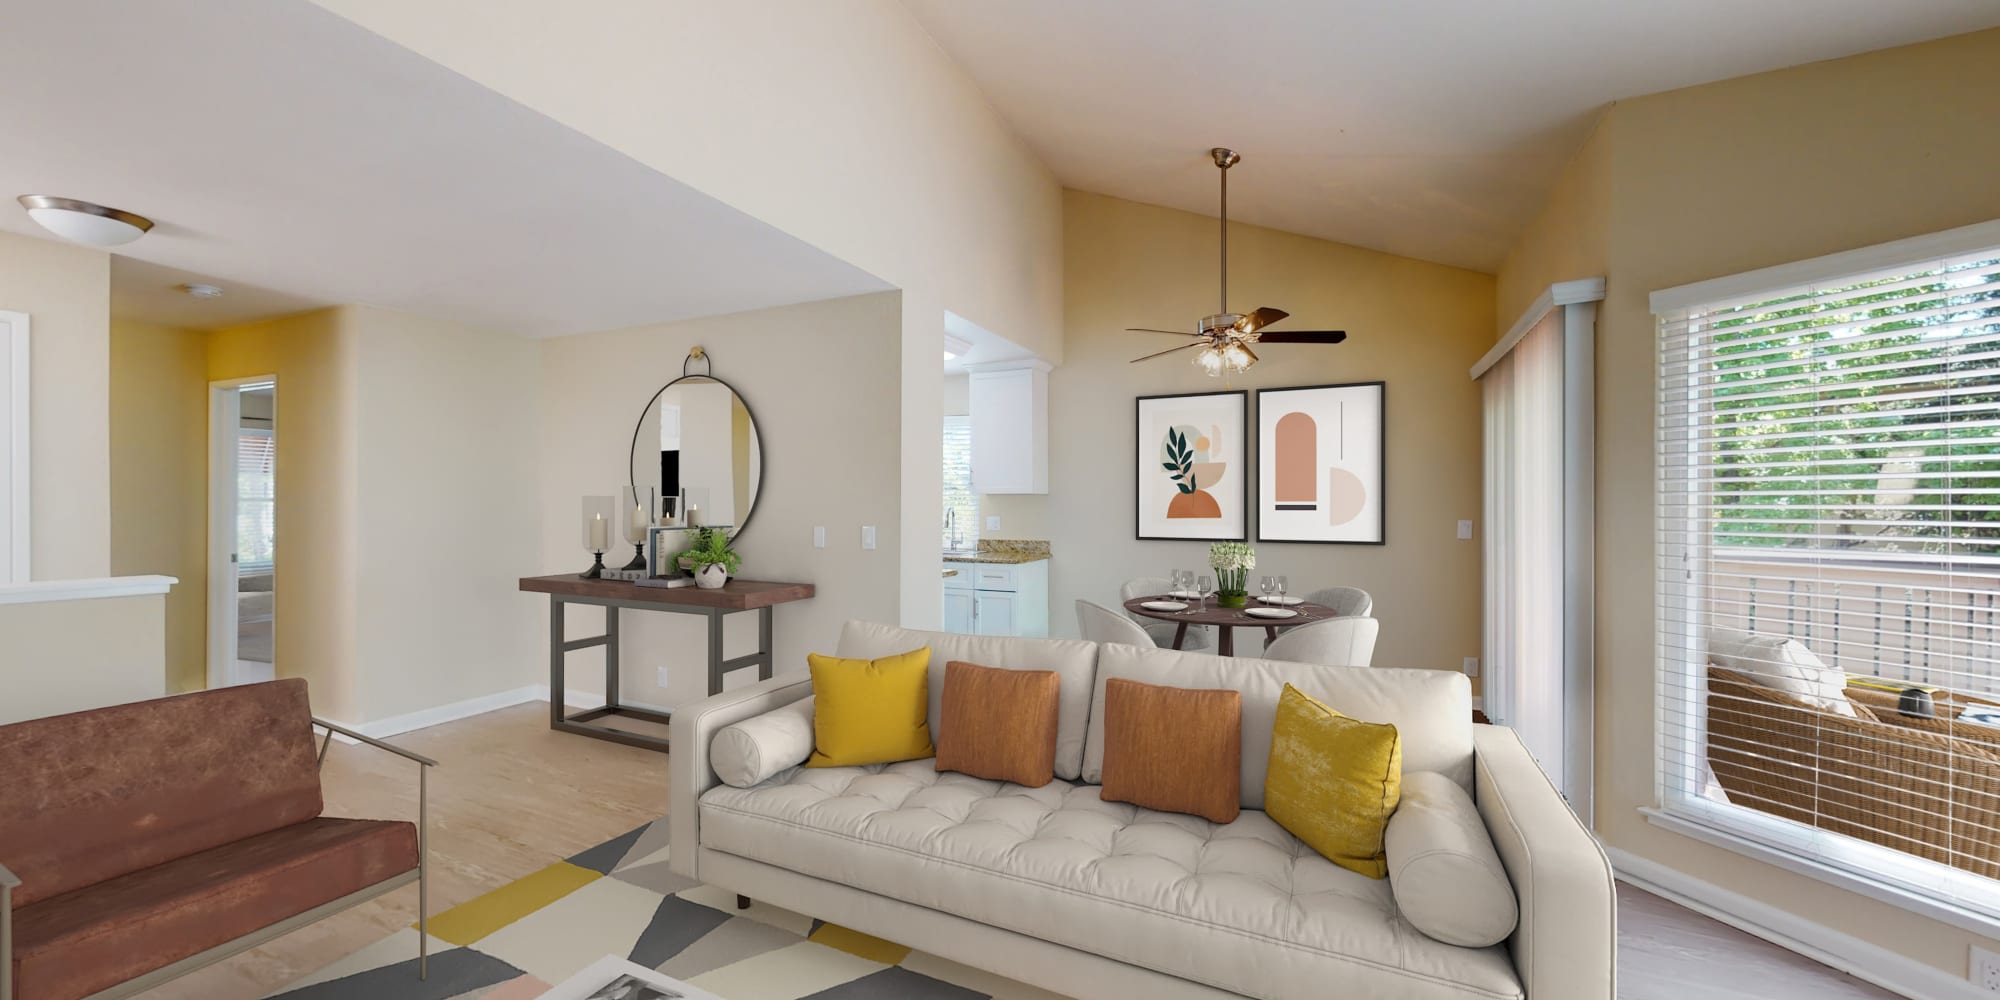 Two-bedroom apartment's living area with bay windows and plank flooring at Valley Plaza Villages in Pleasanton, California